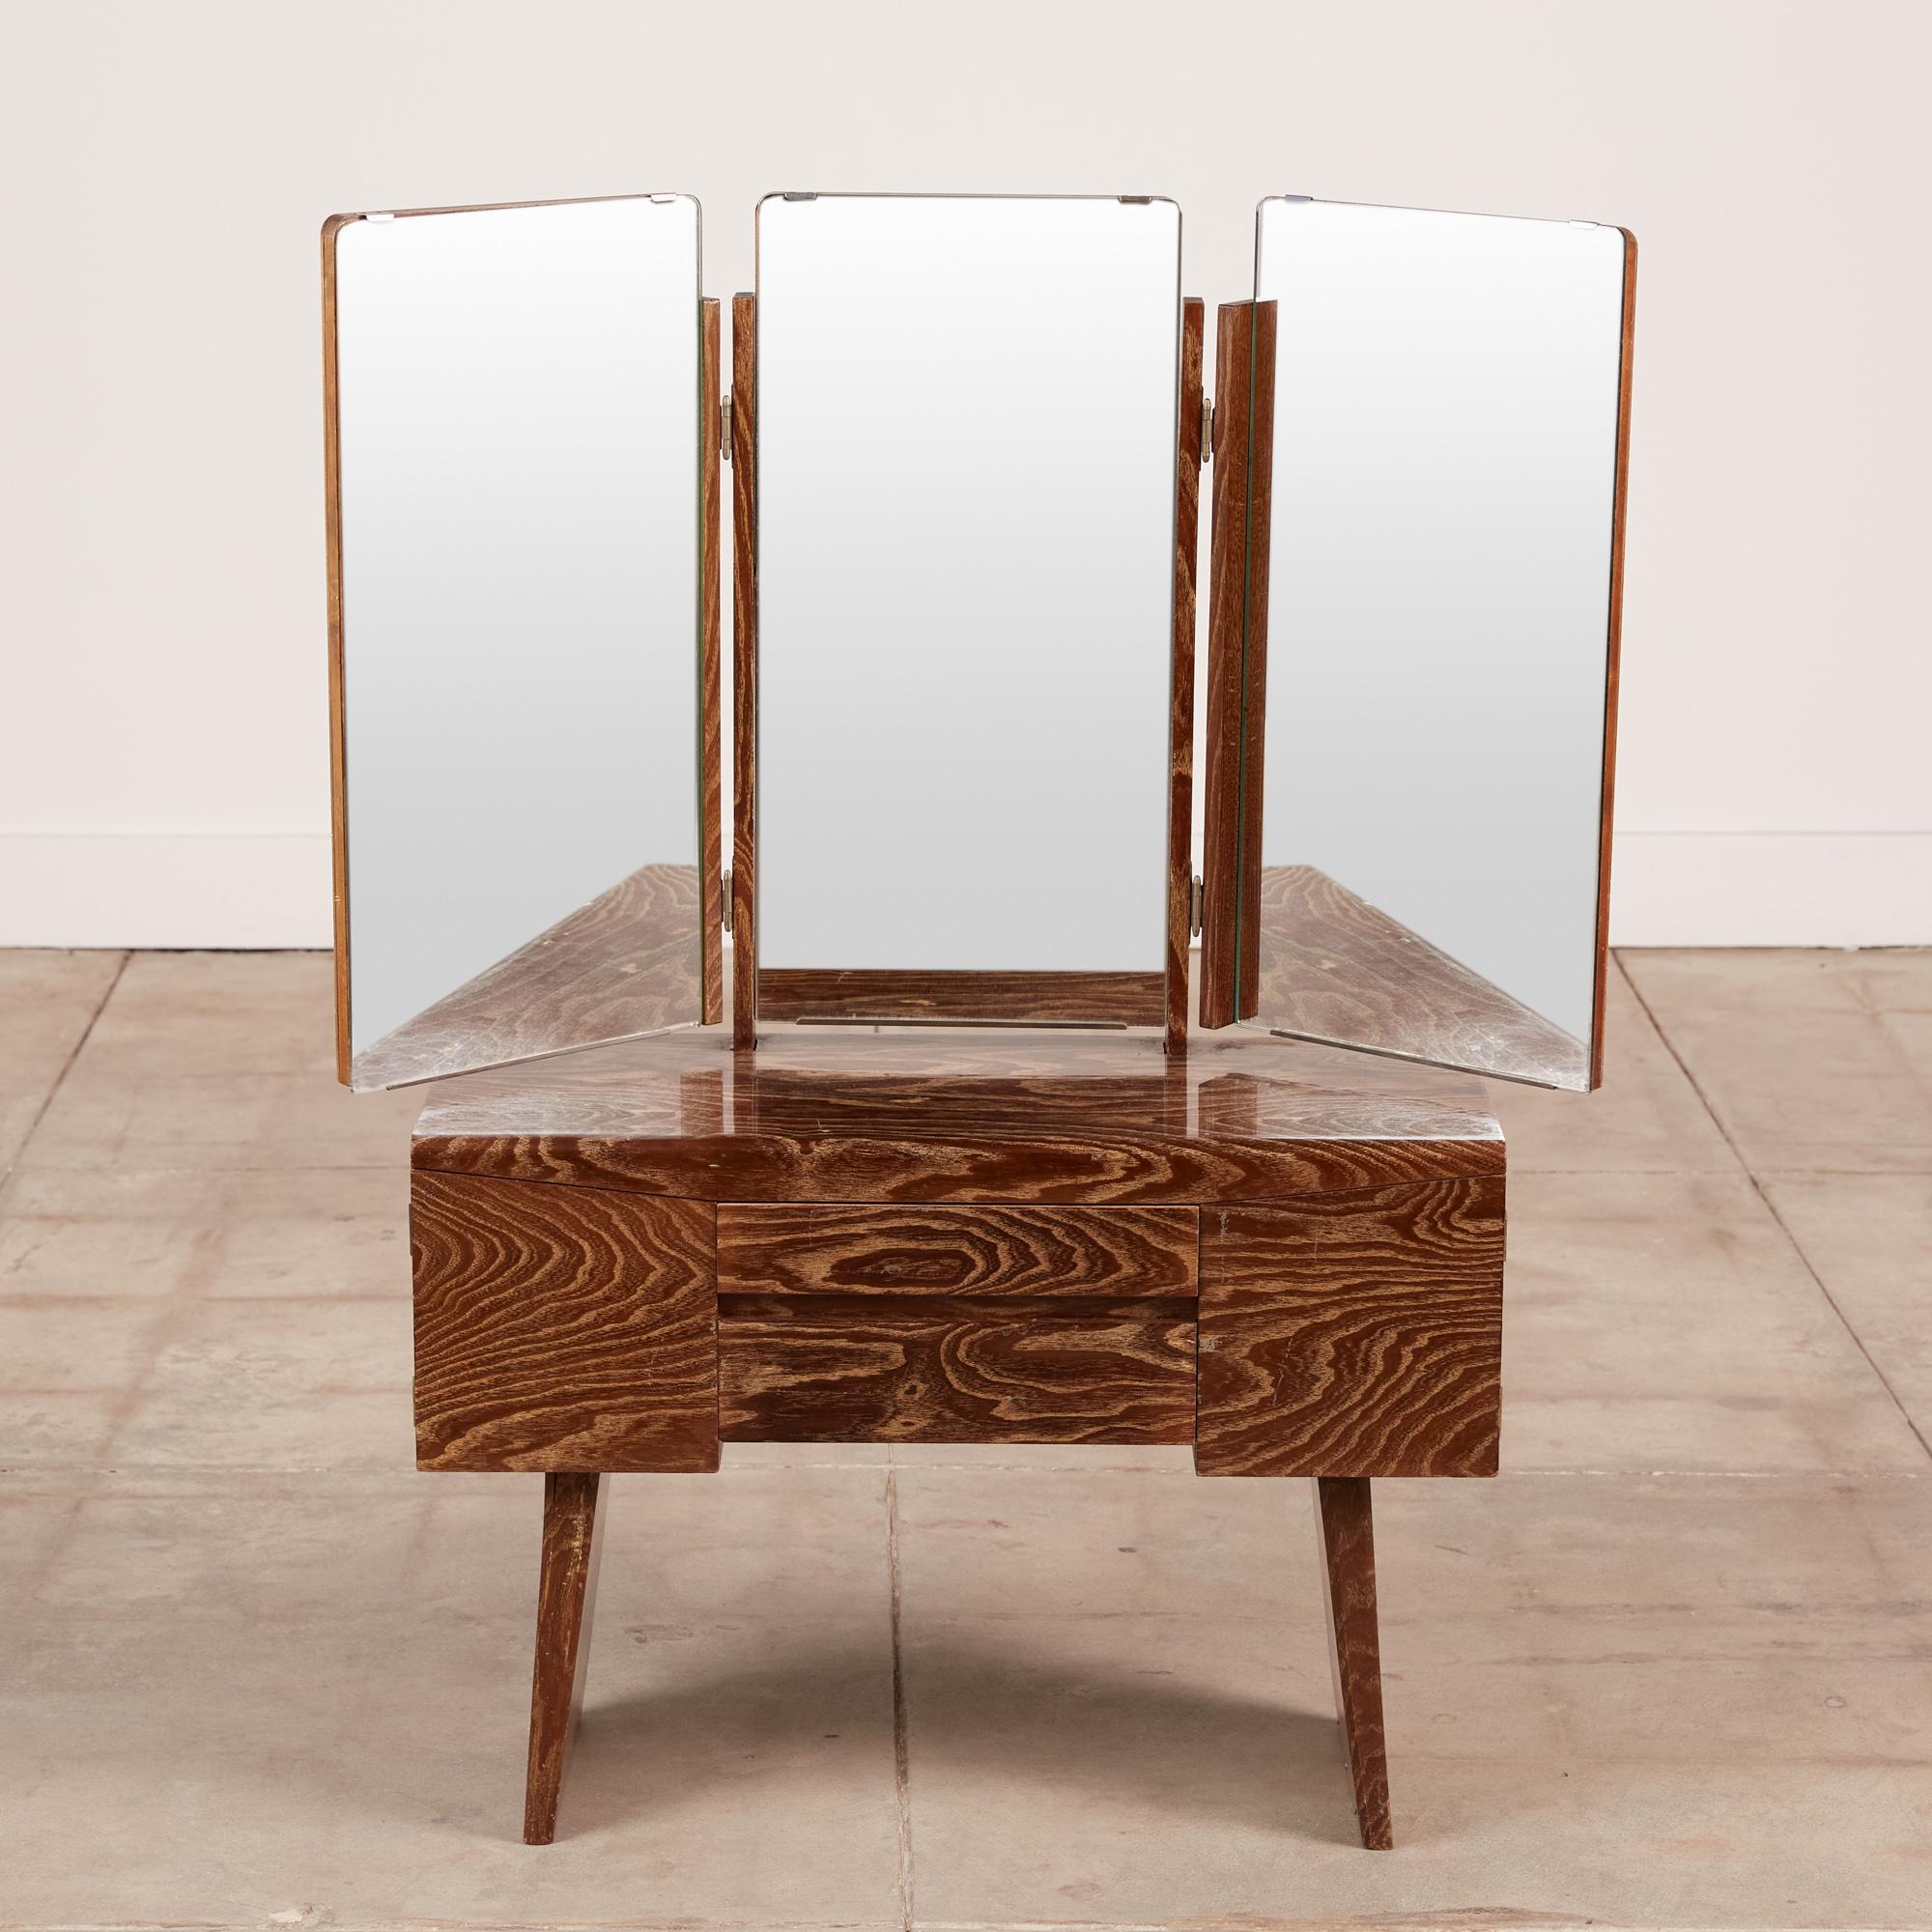 A petite Japanese modernist vanity with tri-folding mirrored panels that sit atop a case with opposing doors and a middle pair of drawers. The cabinet is supported by a pair of tapered legs. The exterior is a stained wood grain with a glossy lacquer